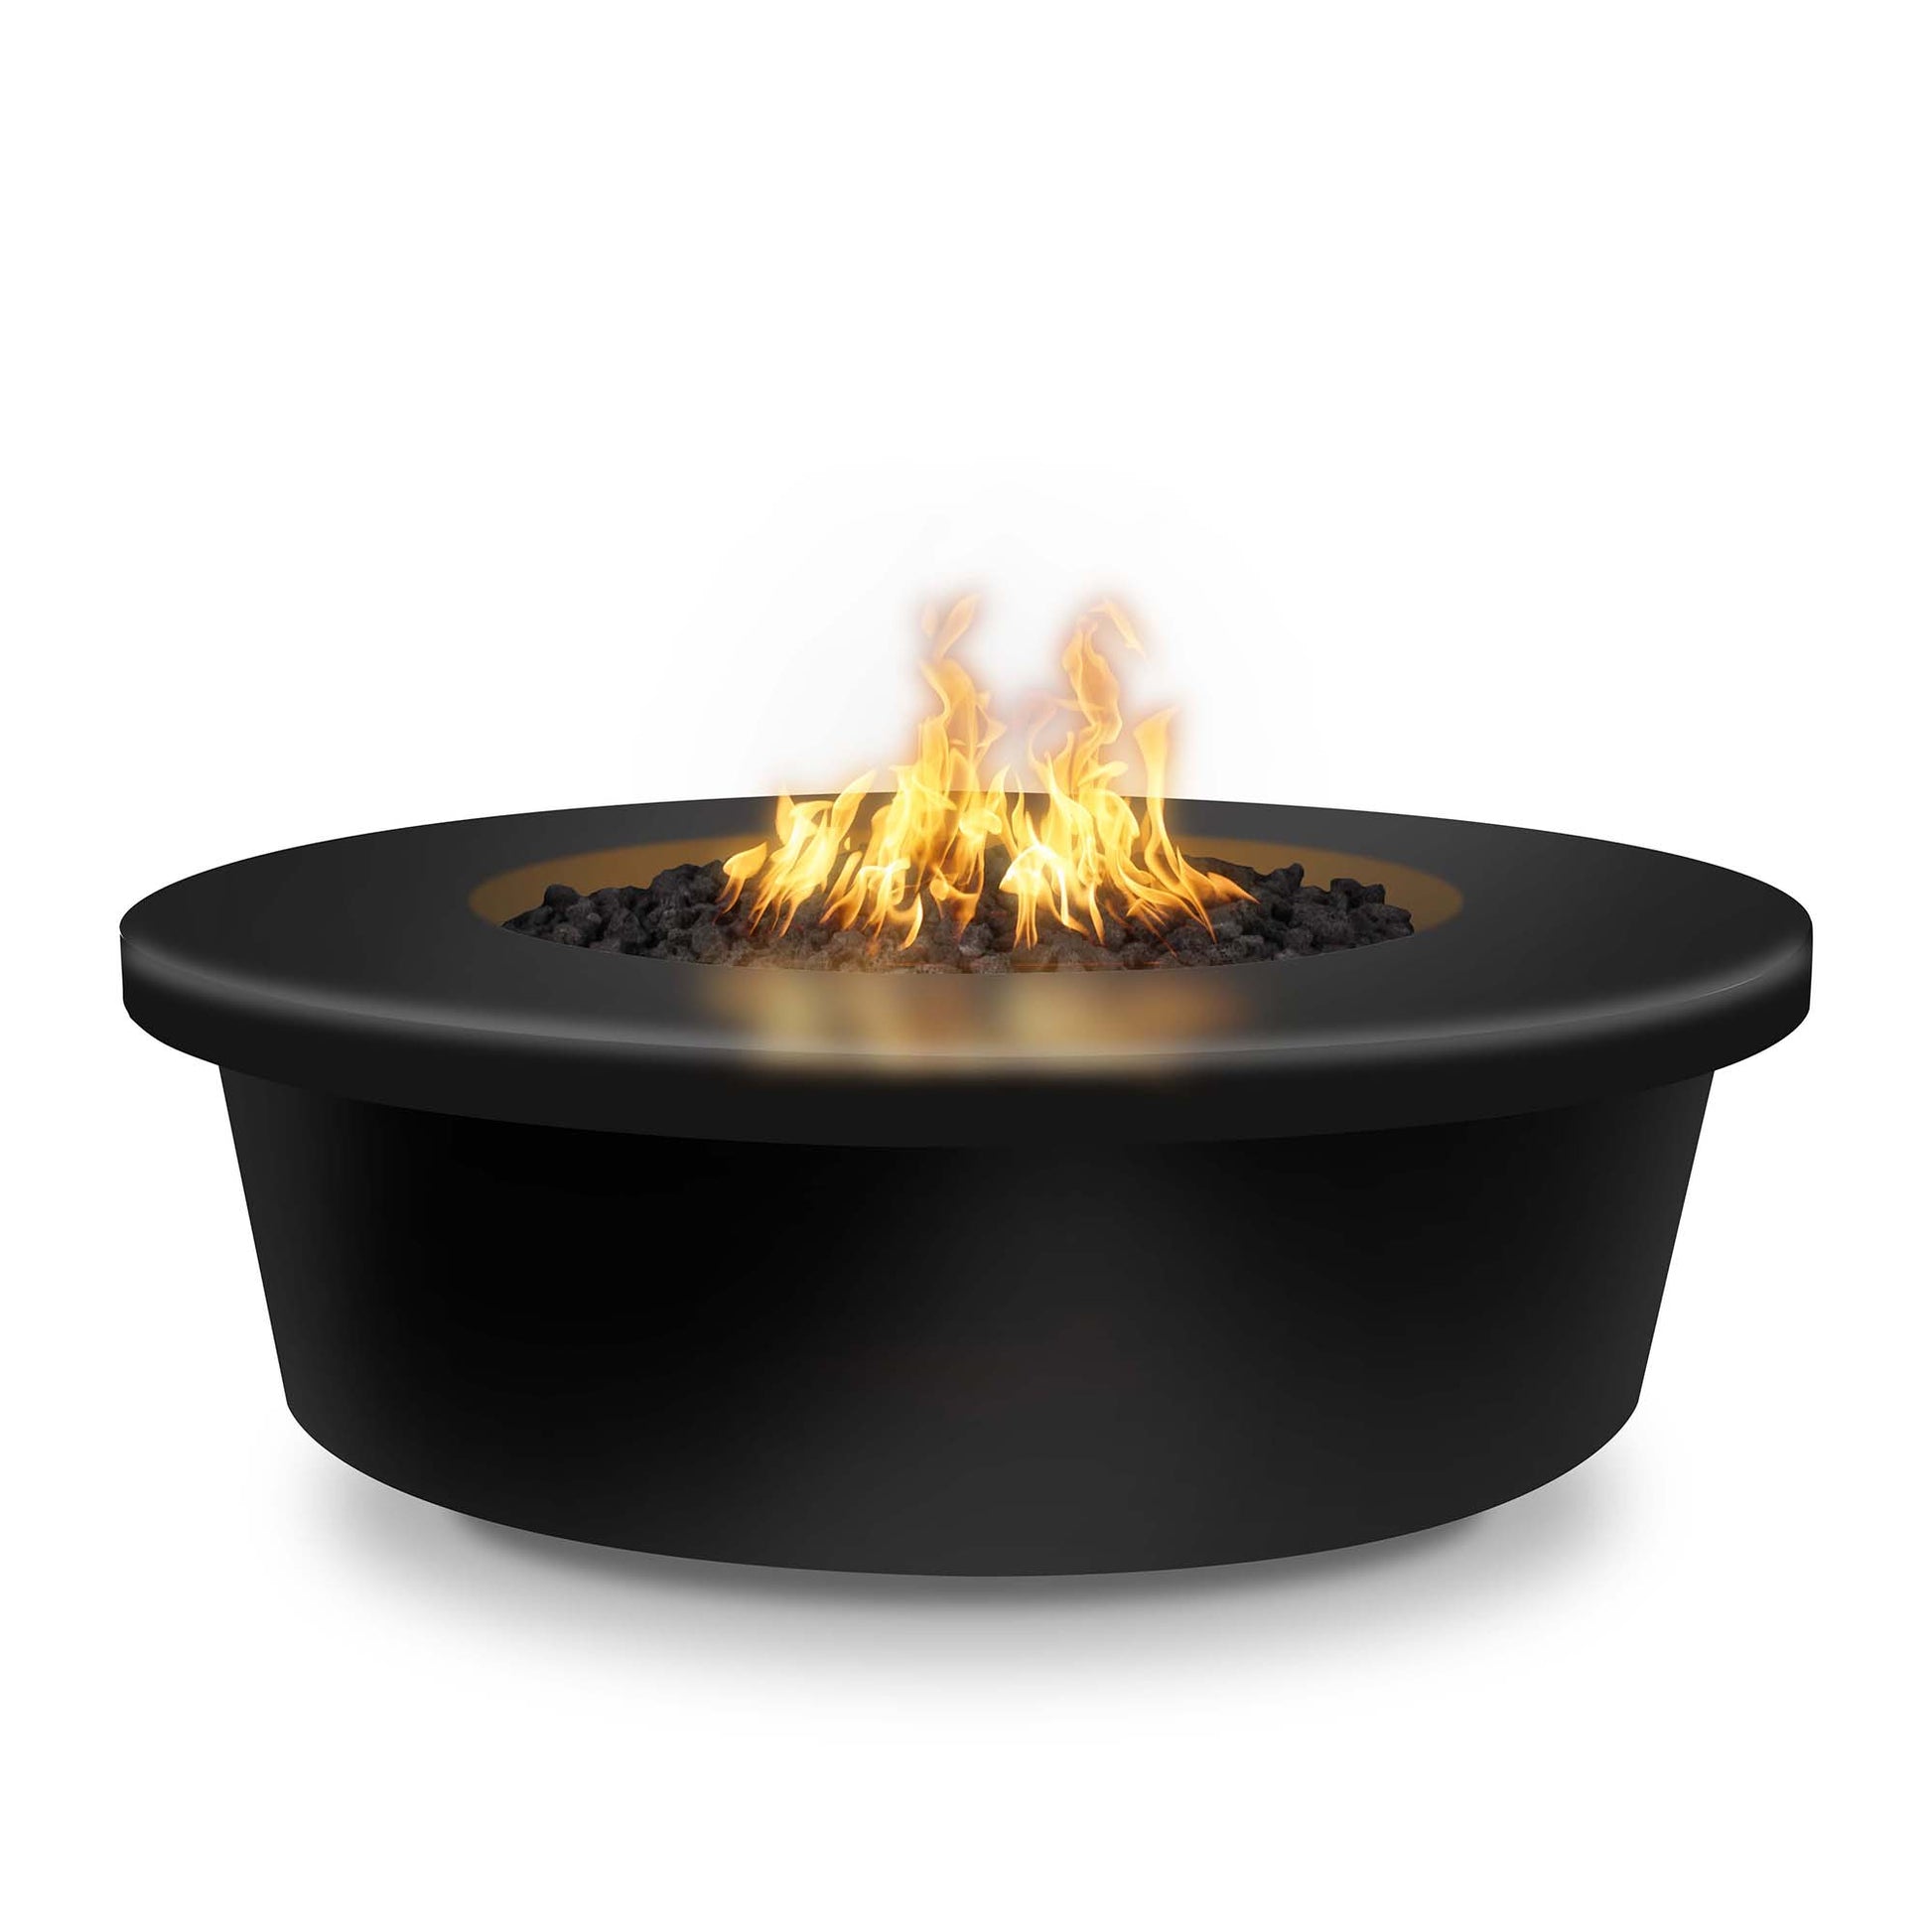 The Outdoor Plus Round Tempe 48" Hammered Copper Natural Gas Fire Pit with Match Lit with Flame Sense Ignition